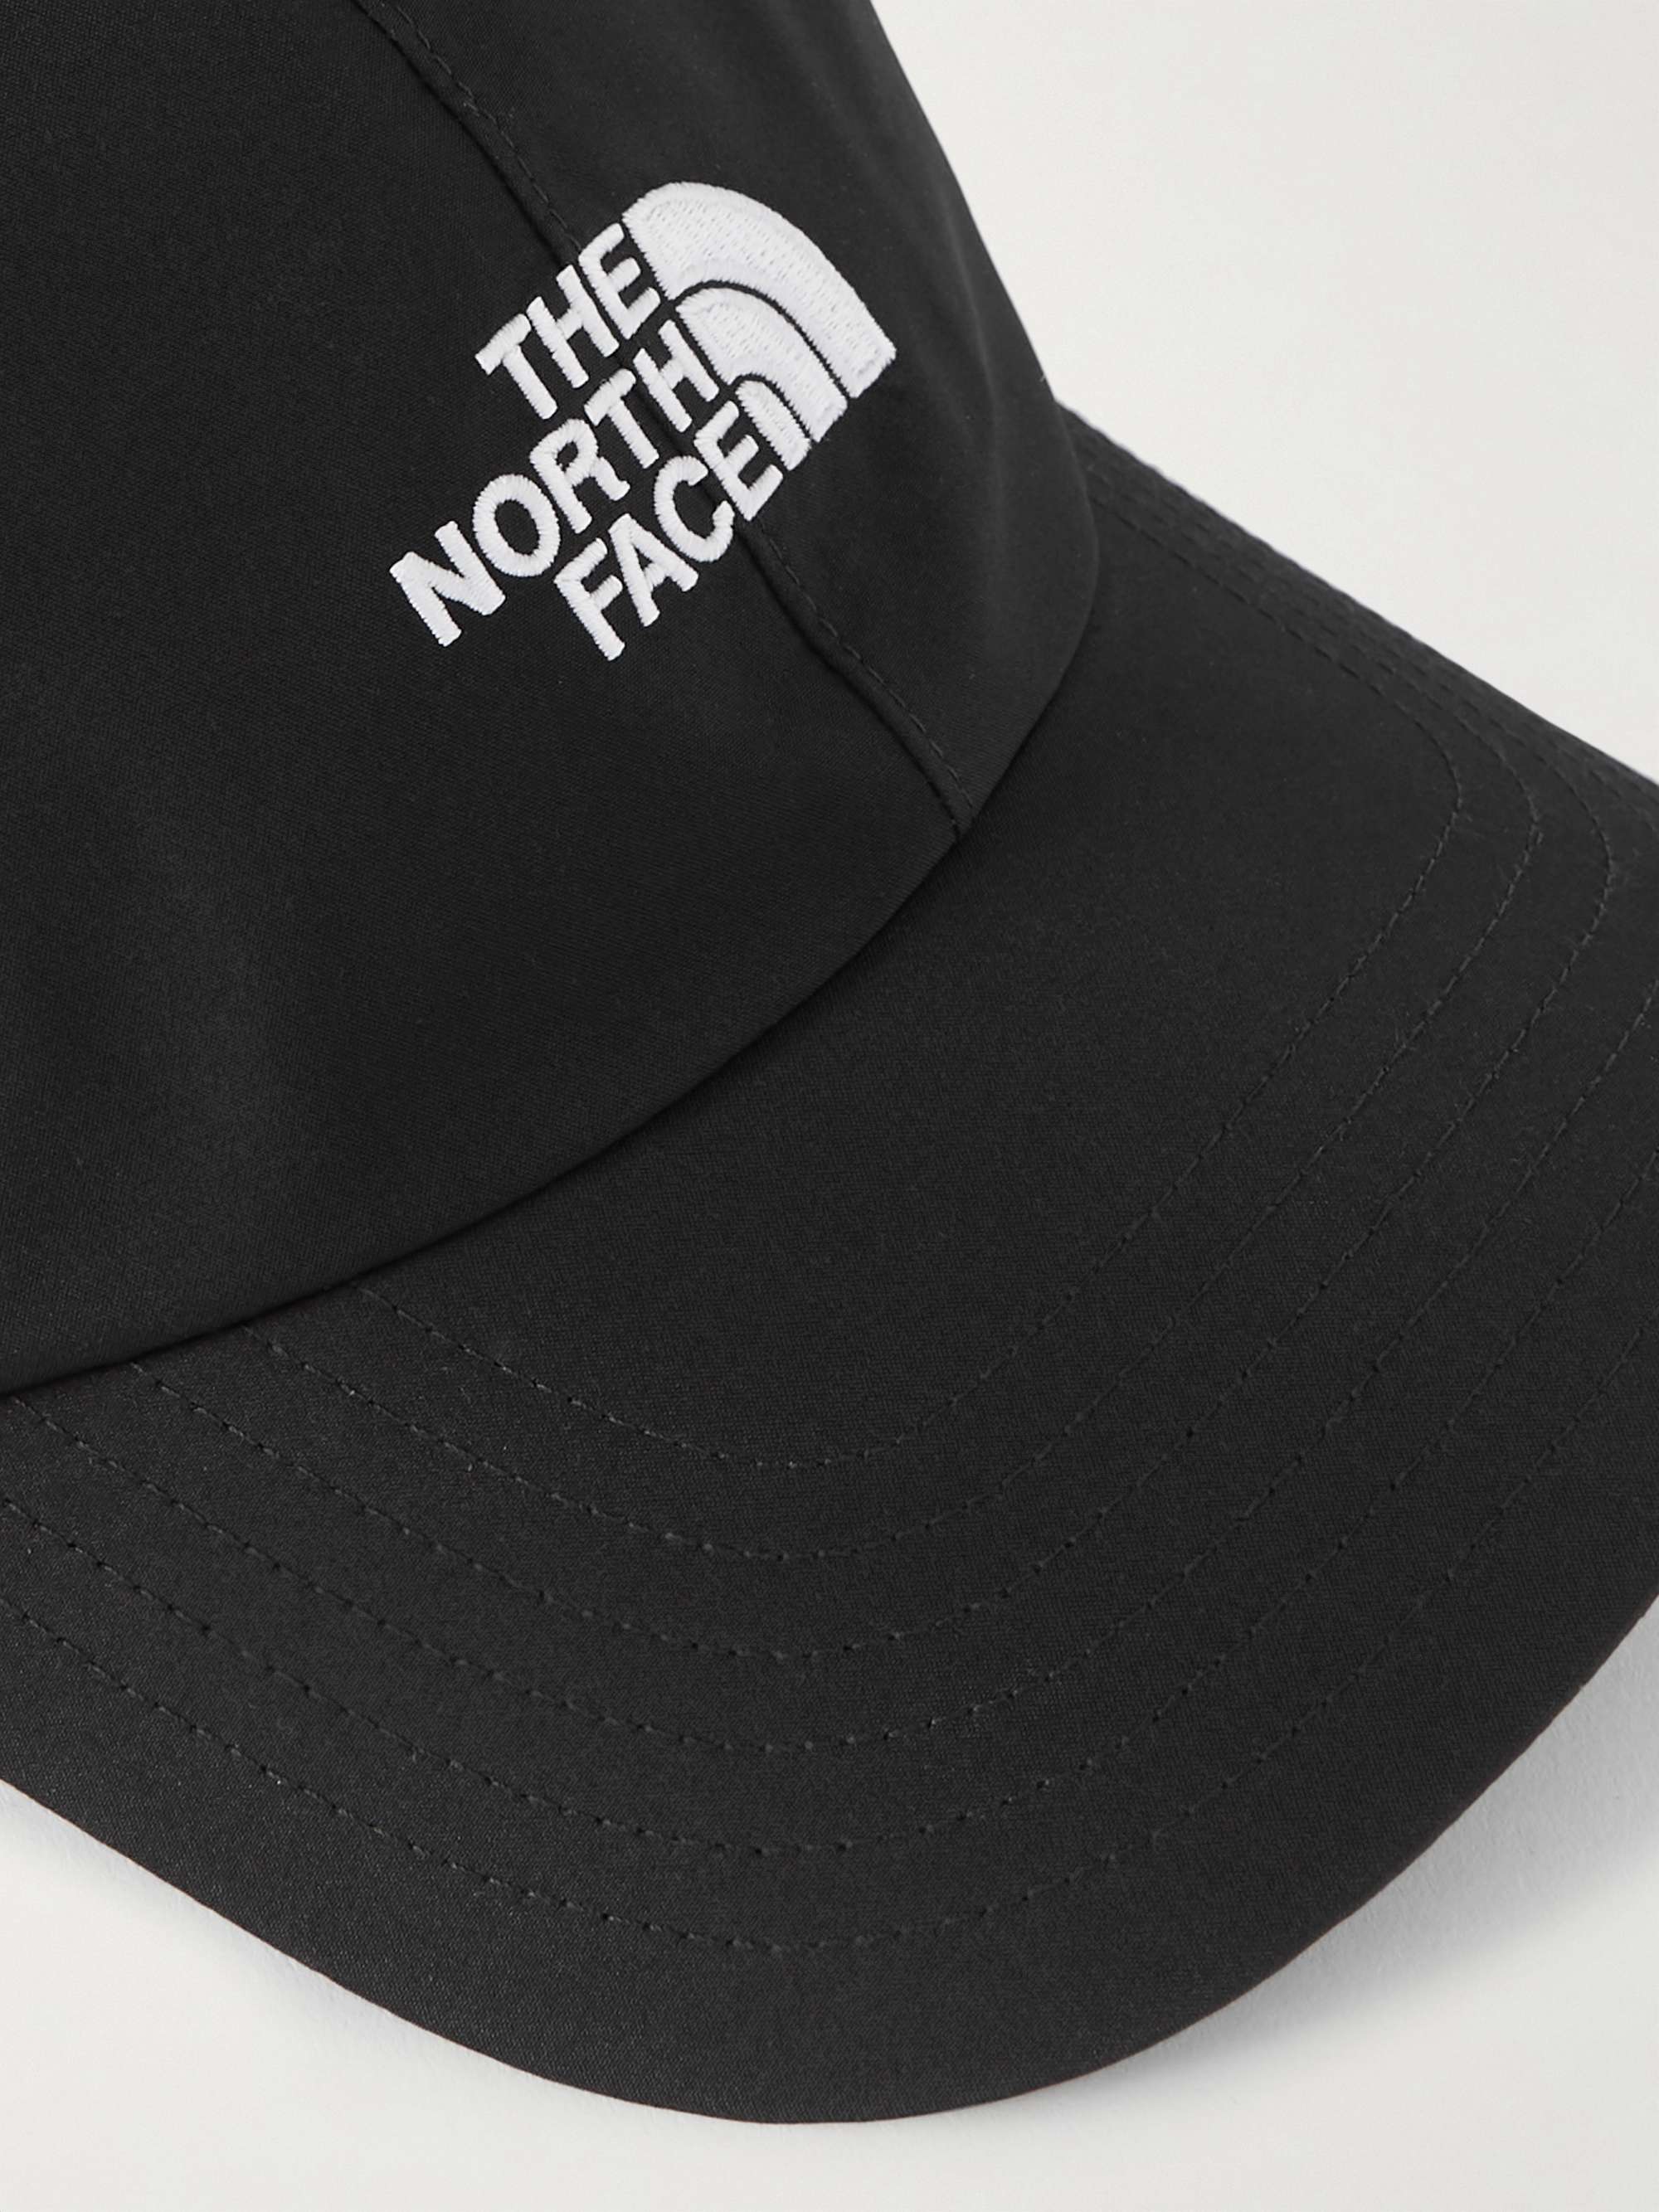 THE NORTH FACE Logo-Embroidered Recycled FUTURELIGHT Baseball Cap